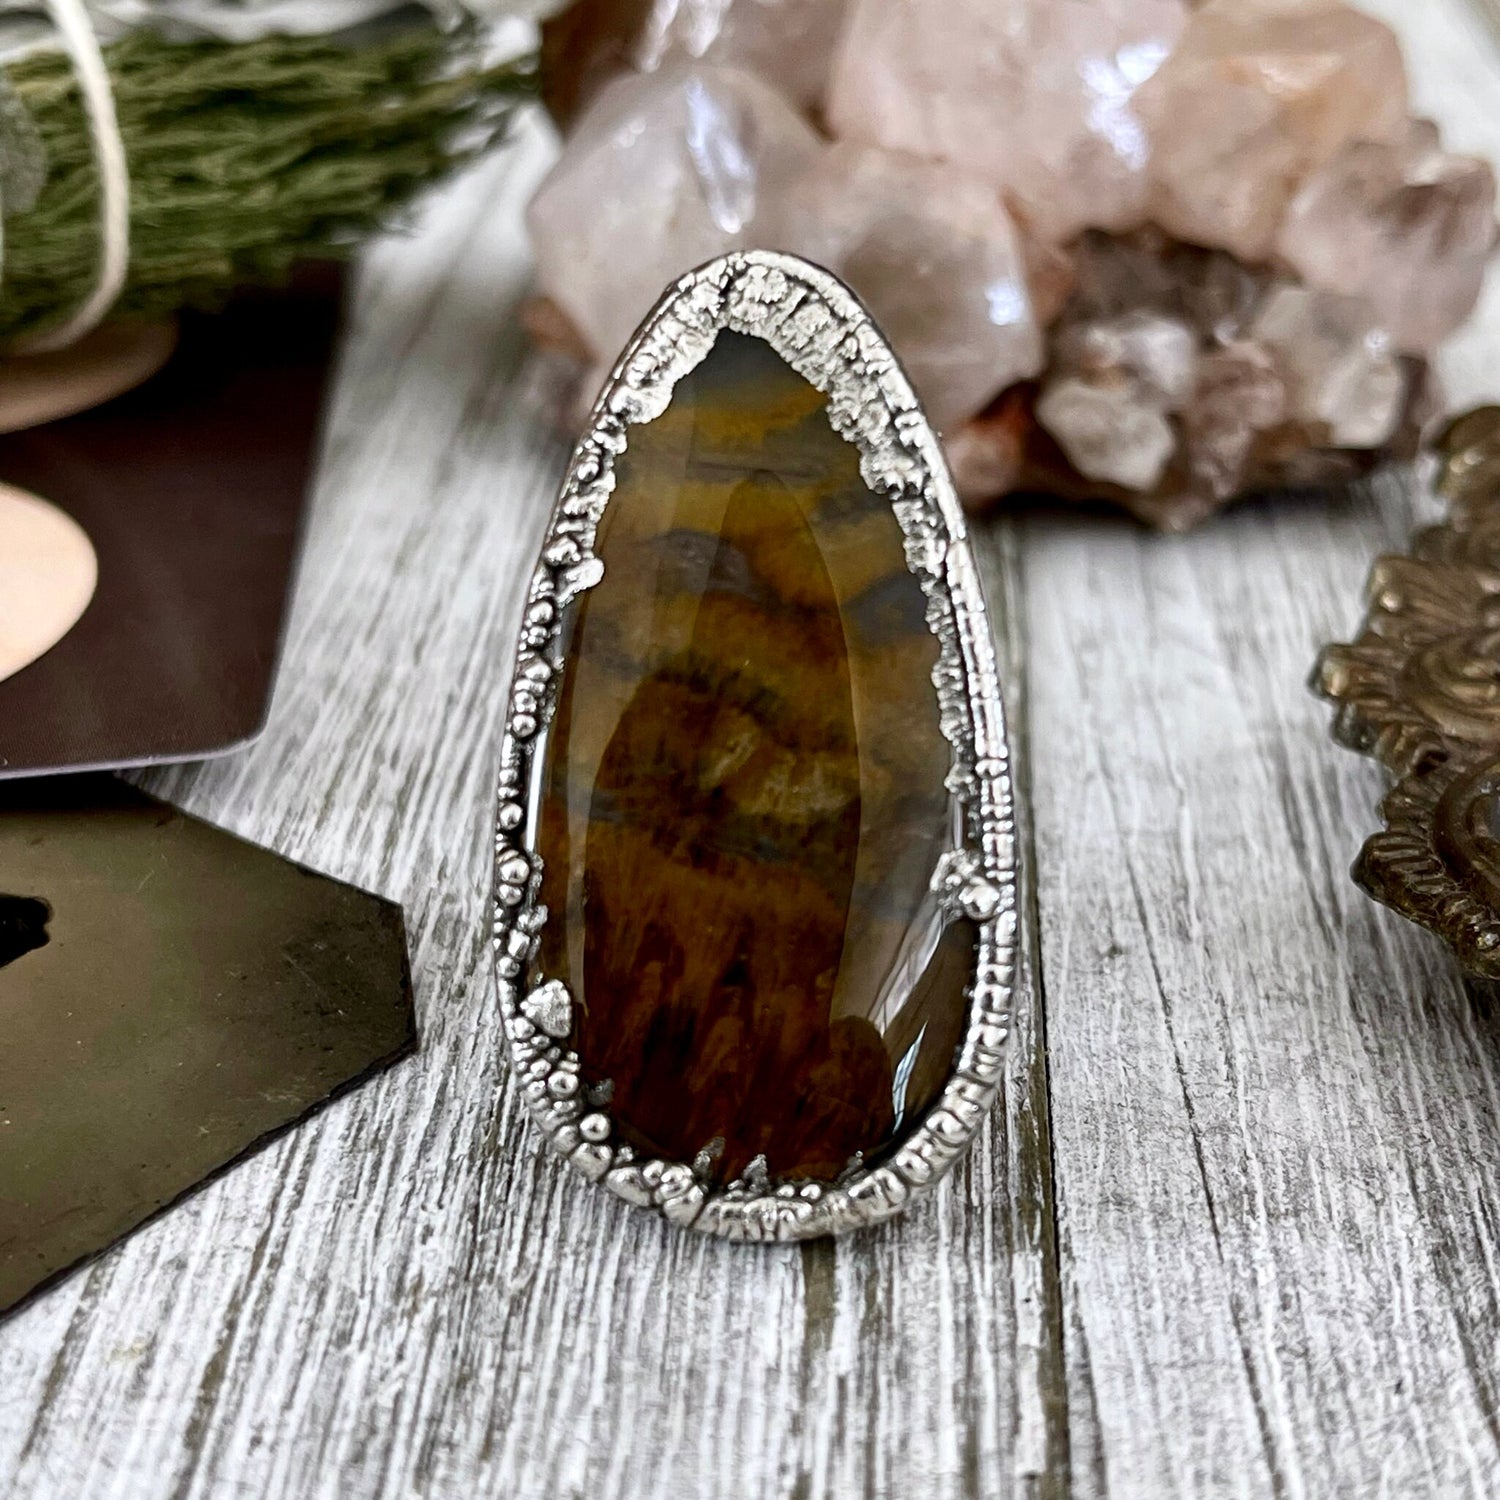 Size 7 Lion Skin Quartz Large Crystal Statement Ring in Fine Silver / Foxlark Collection - One of a Kind / Big Crystal Ring Witchy Jewelry